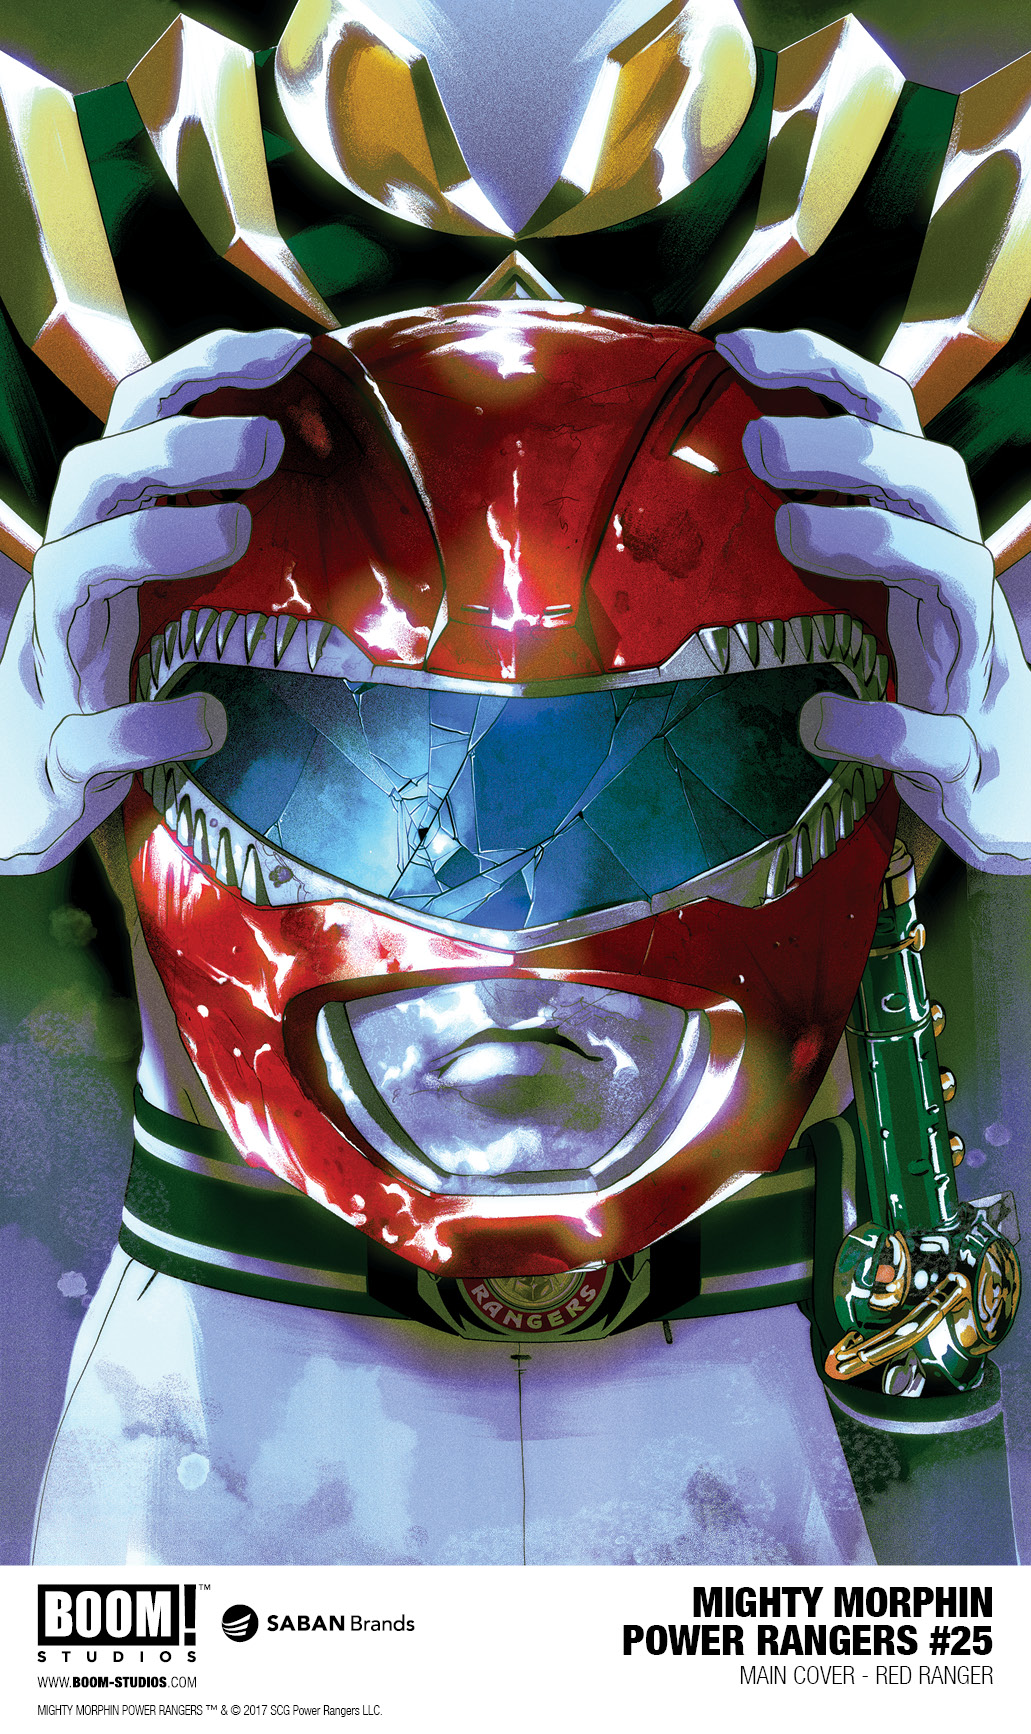 25 Years Of Power Rangers Are Uniting For Their Next Comic Crossover